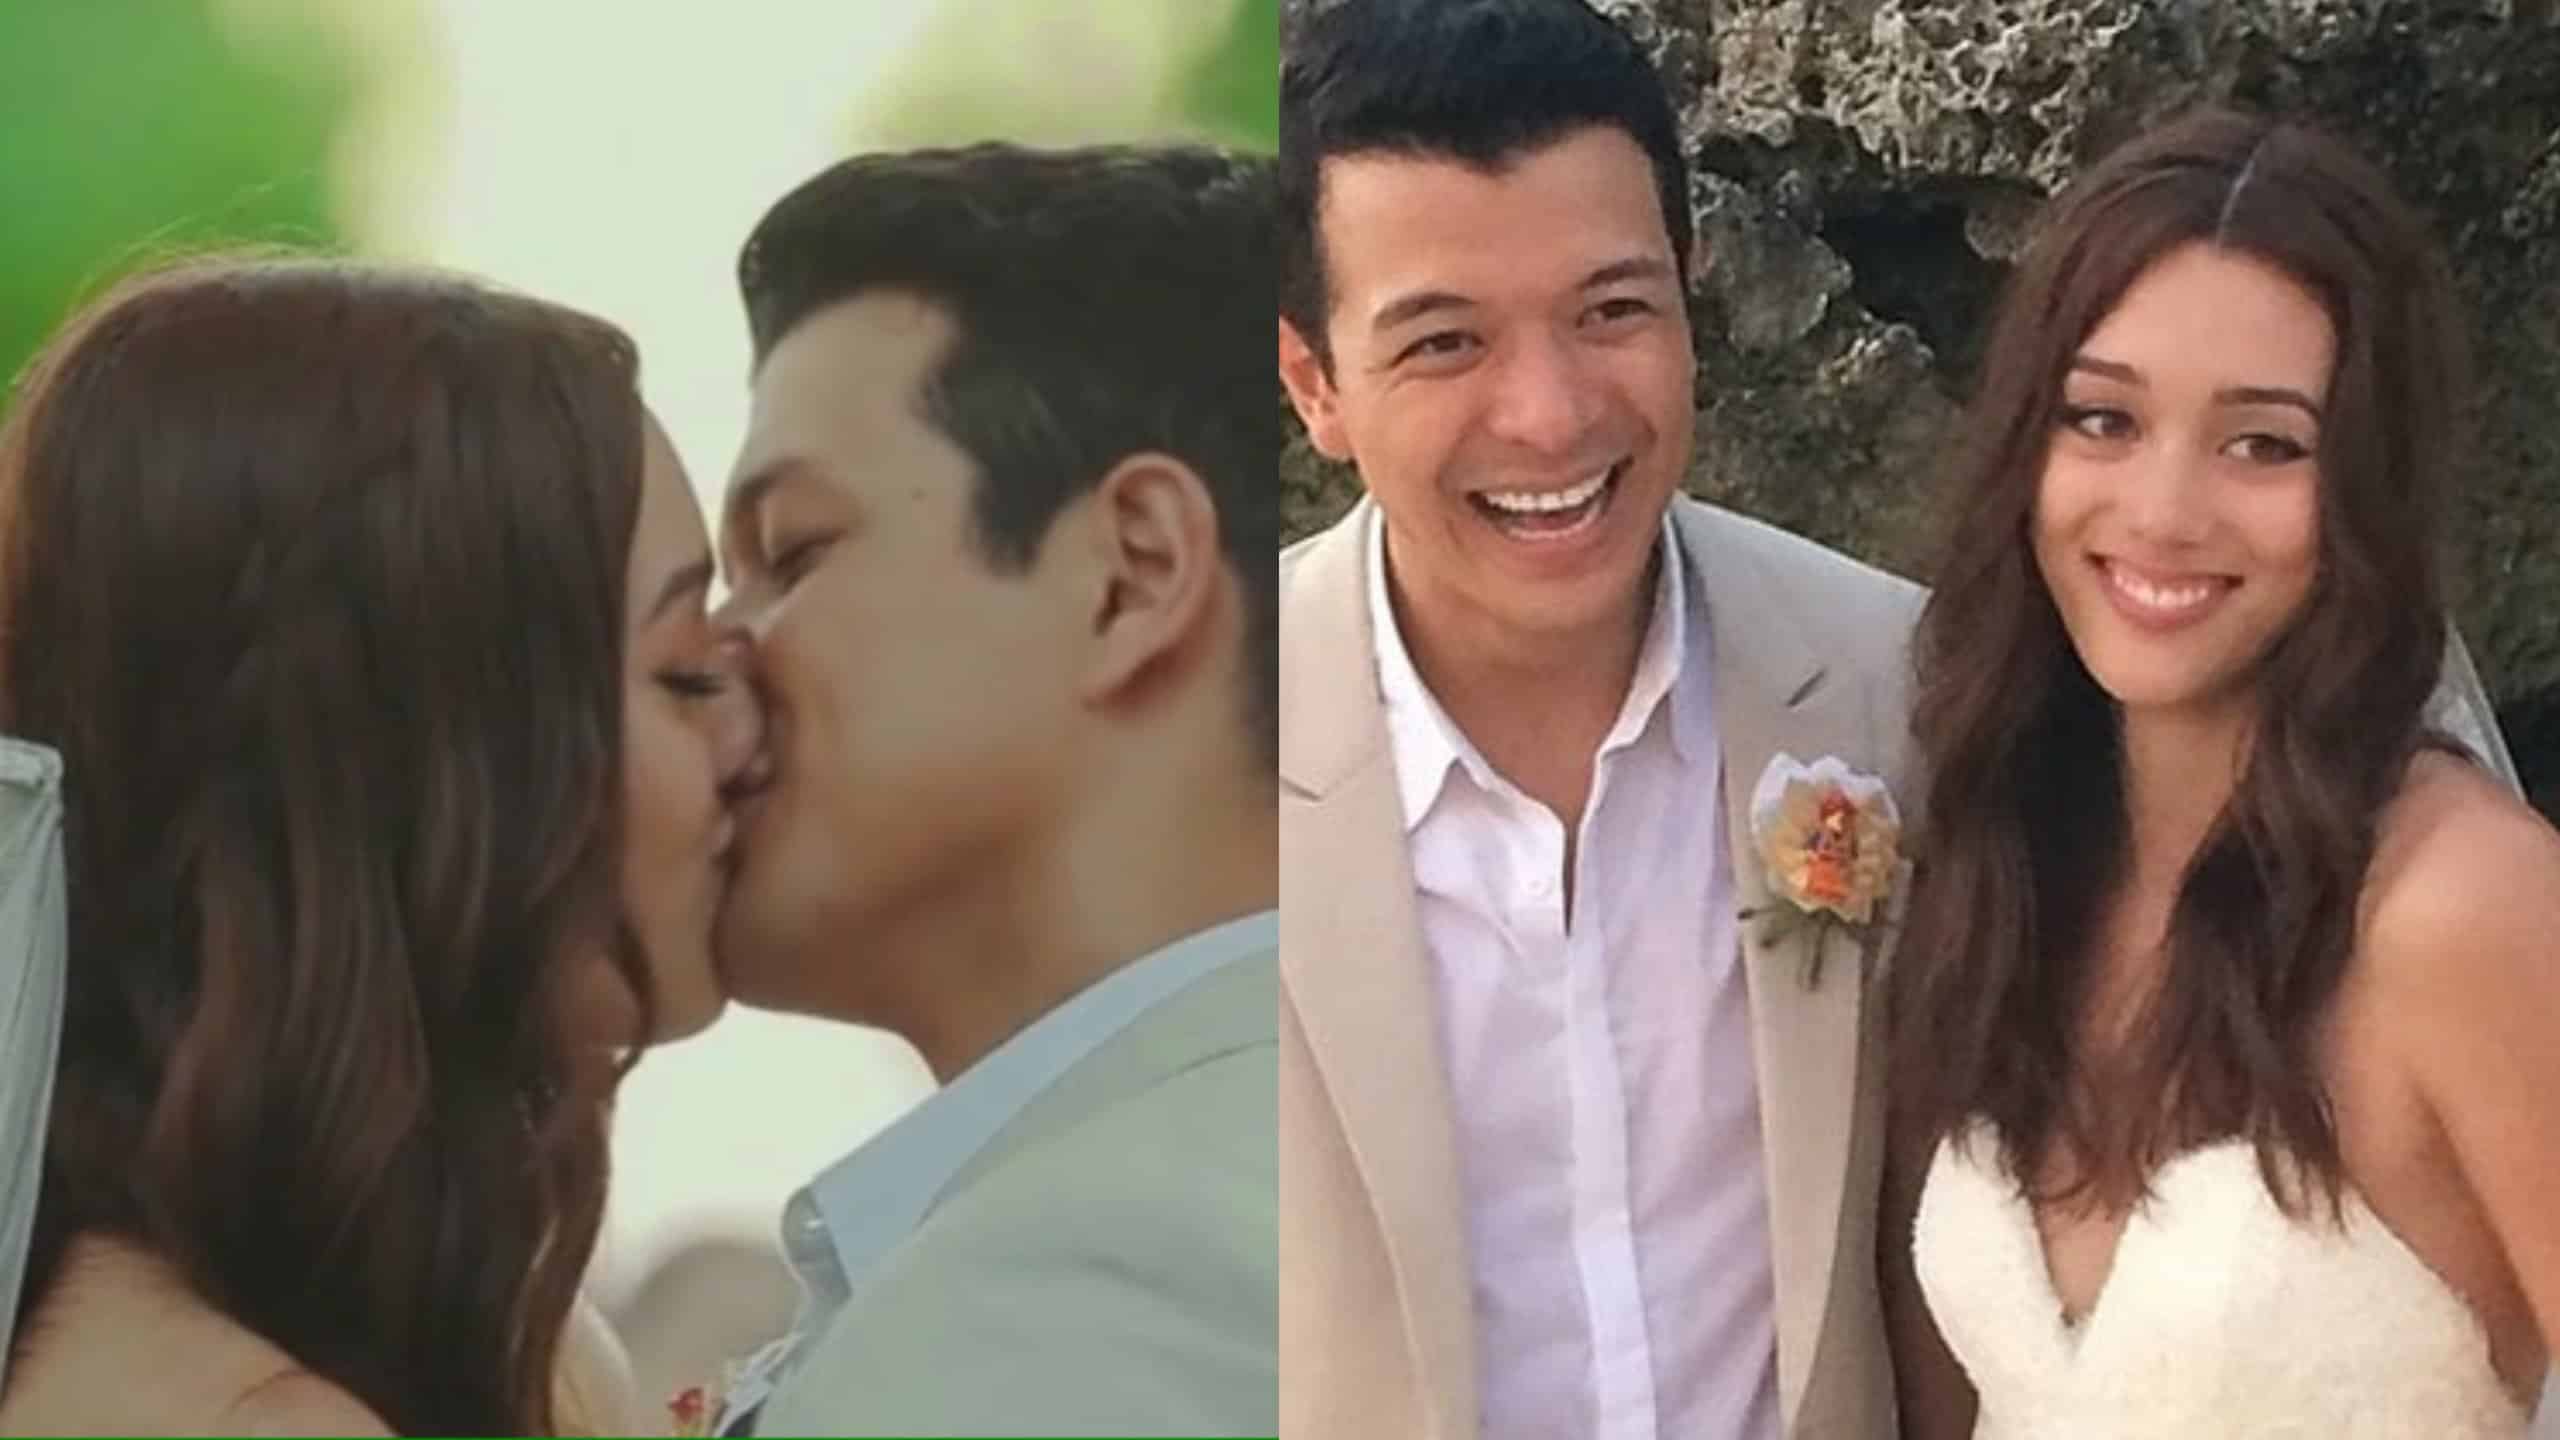 jericho rosales and wife break up